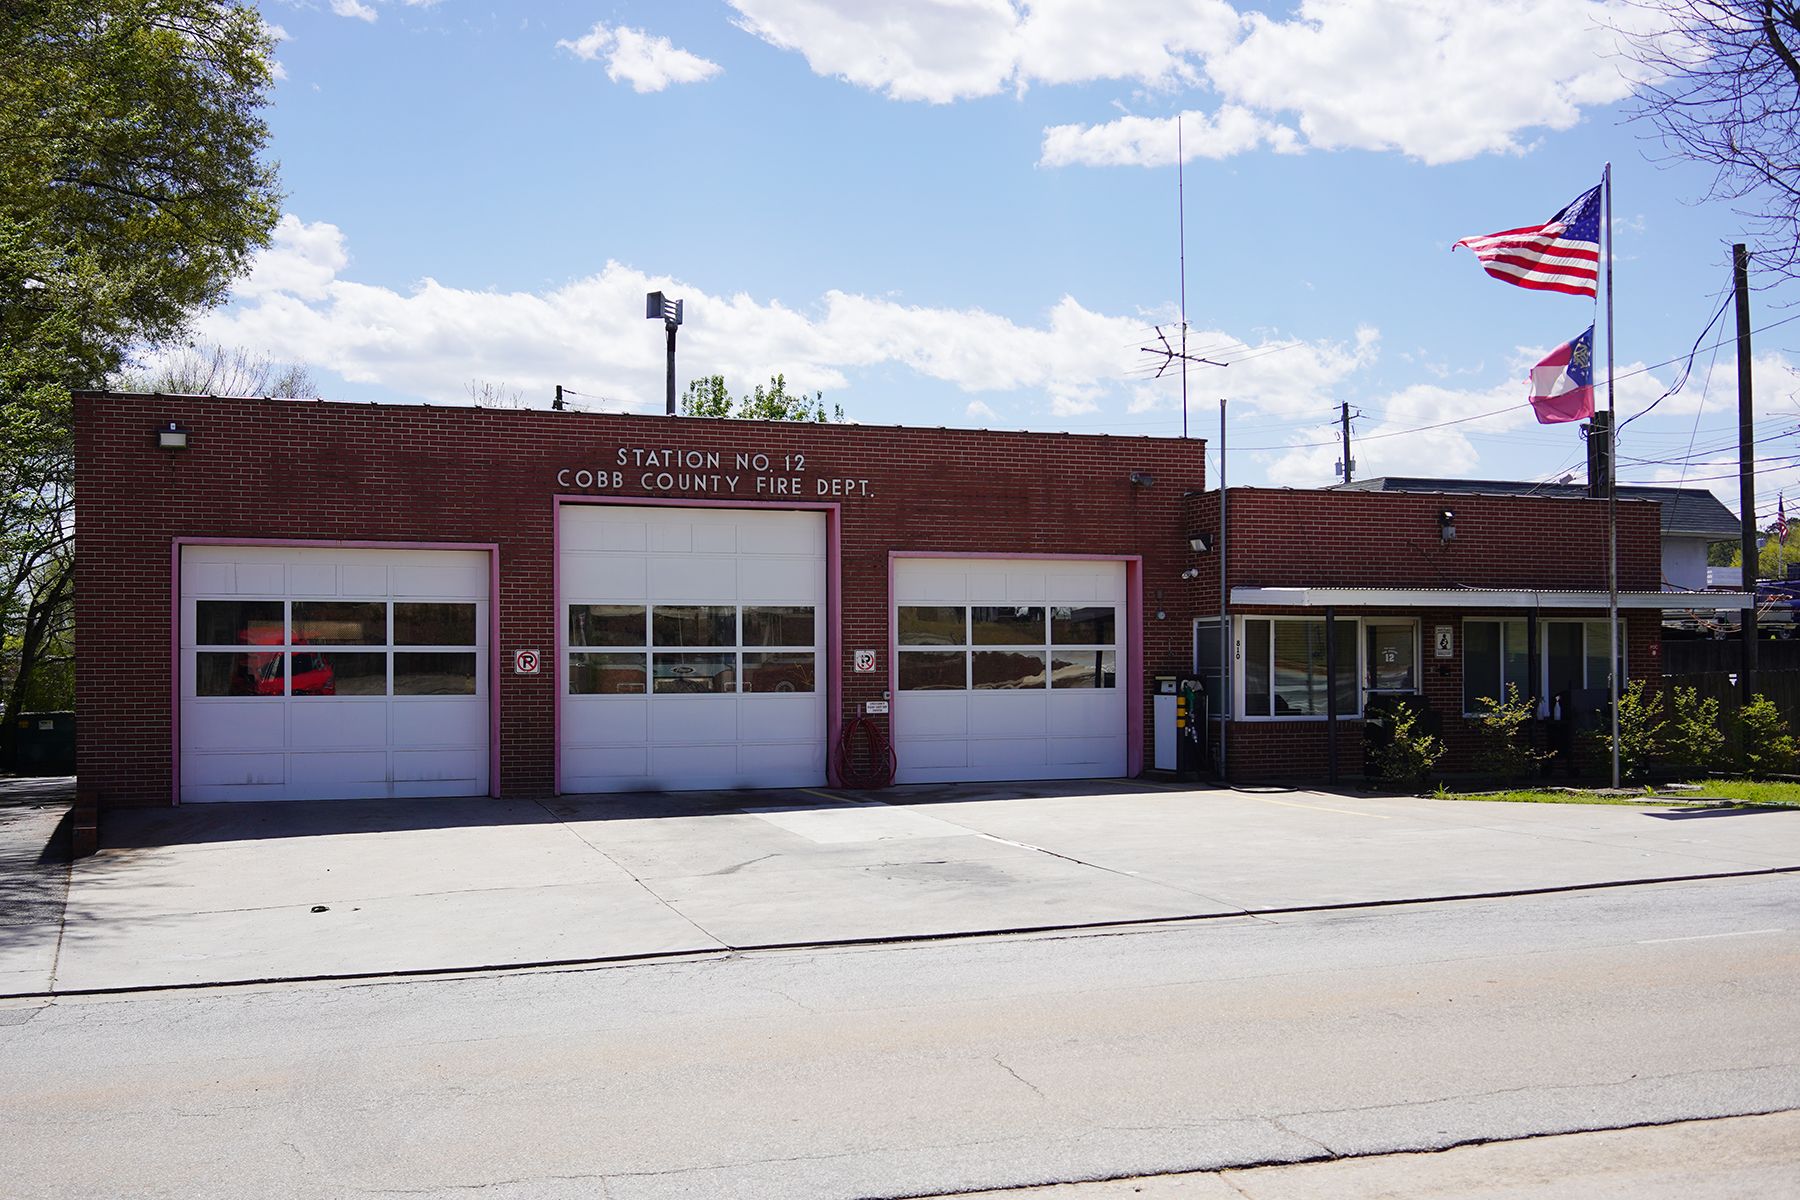 Outside of Fire Station 12